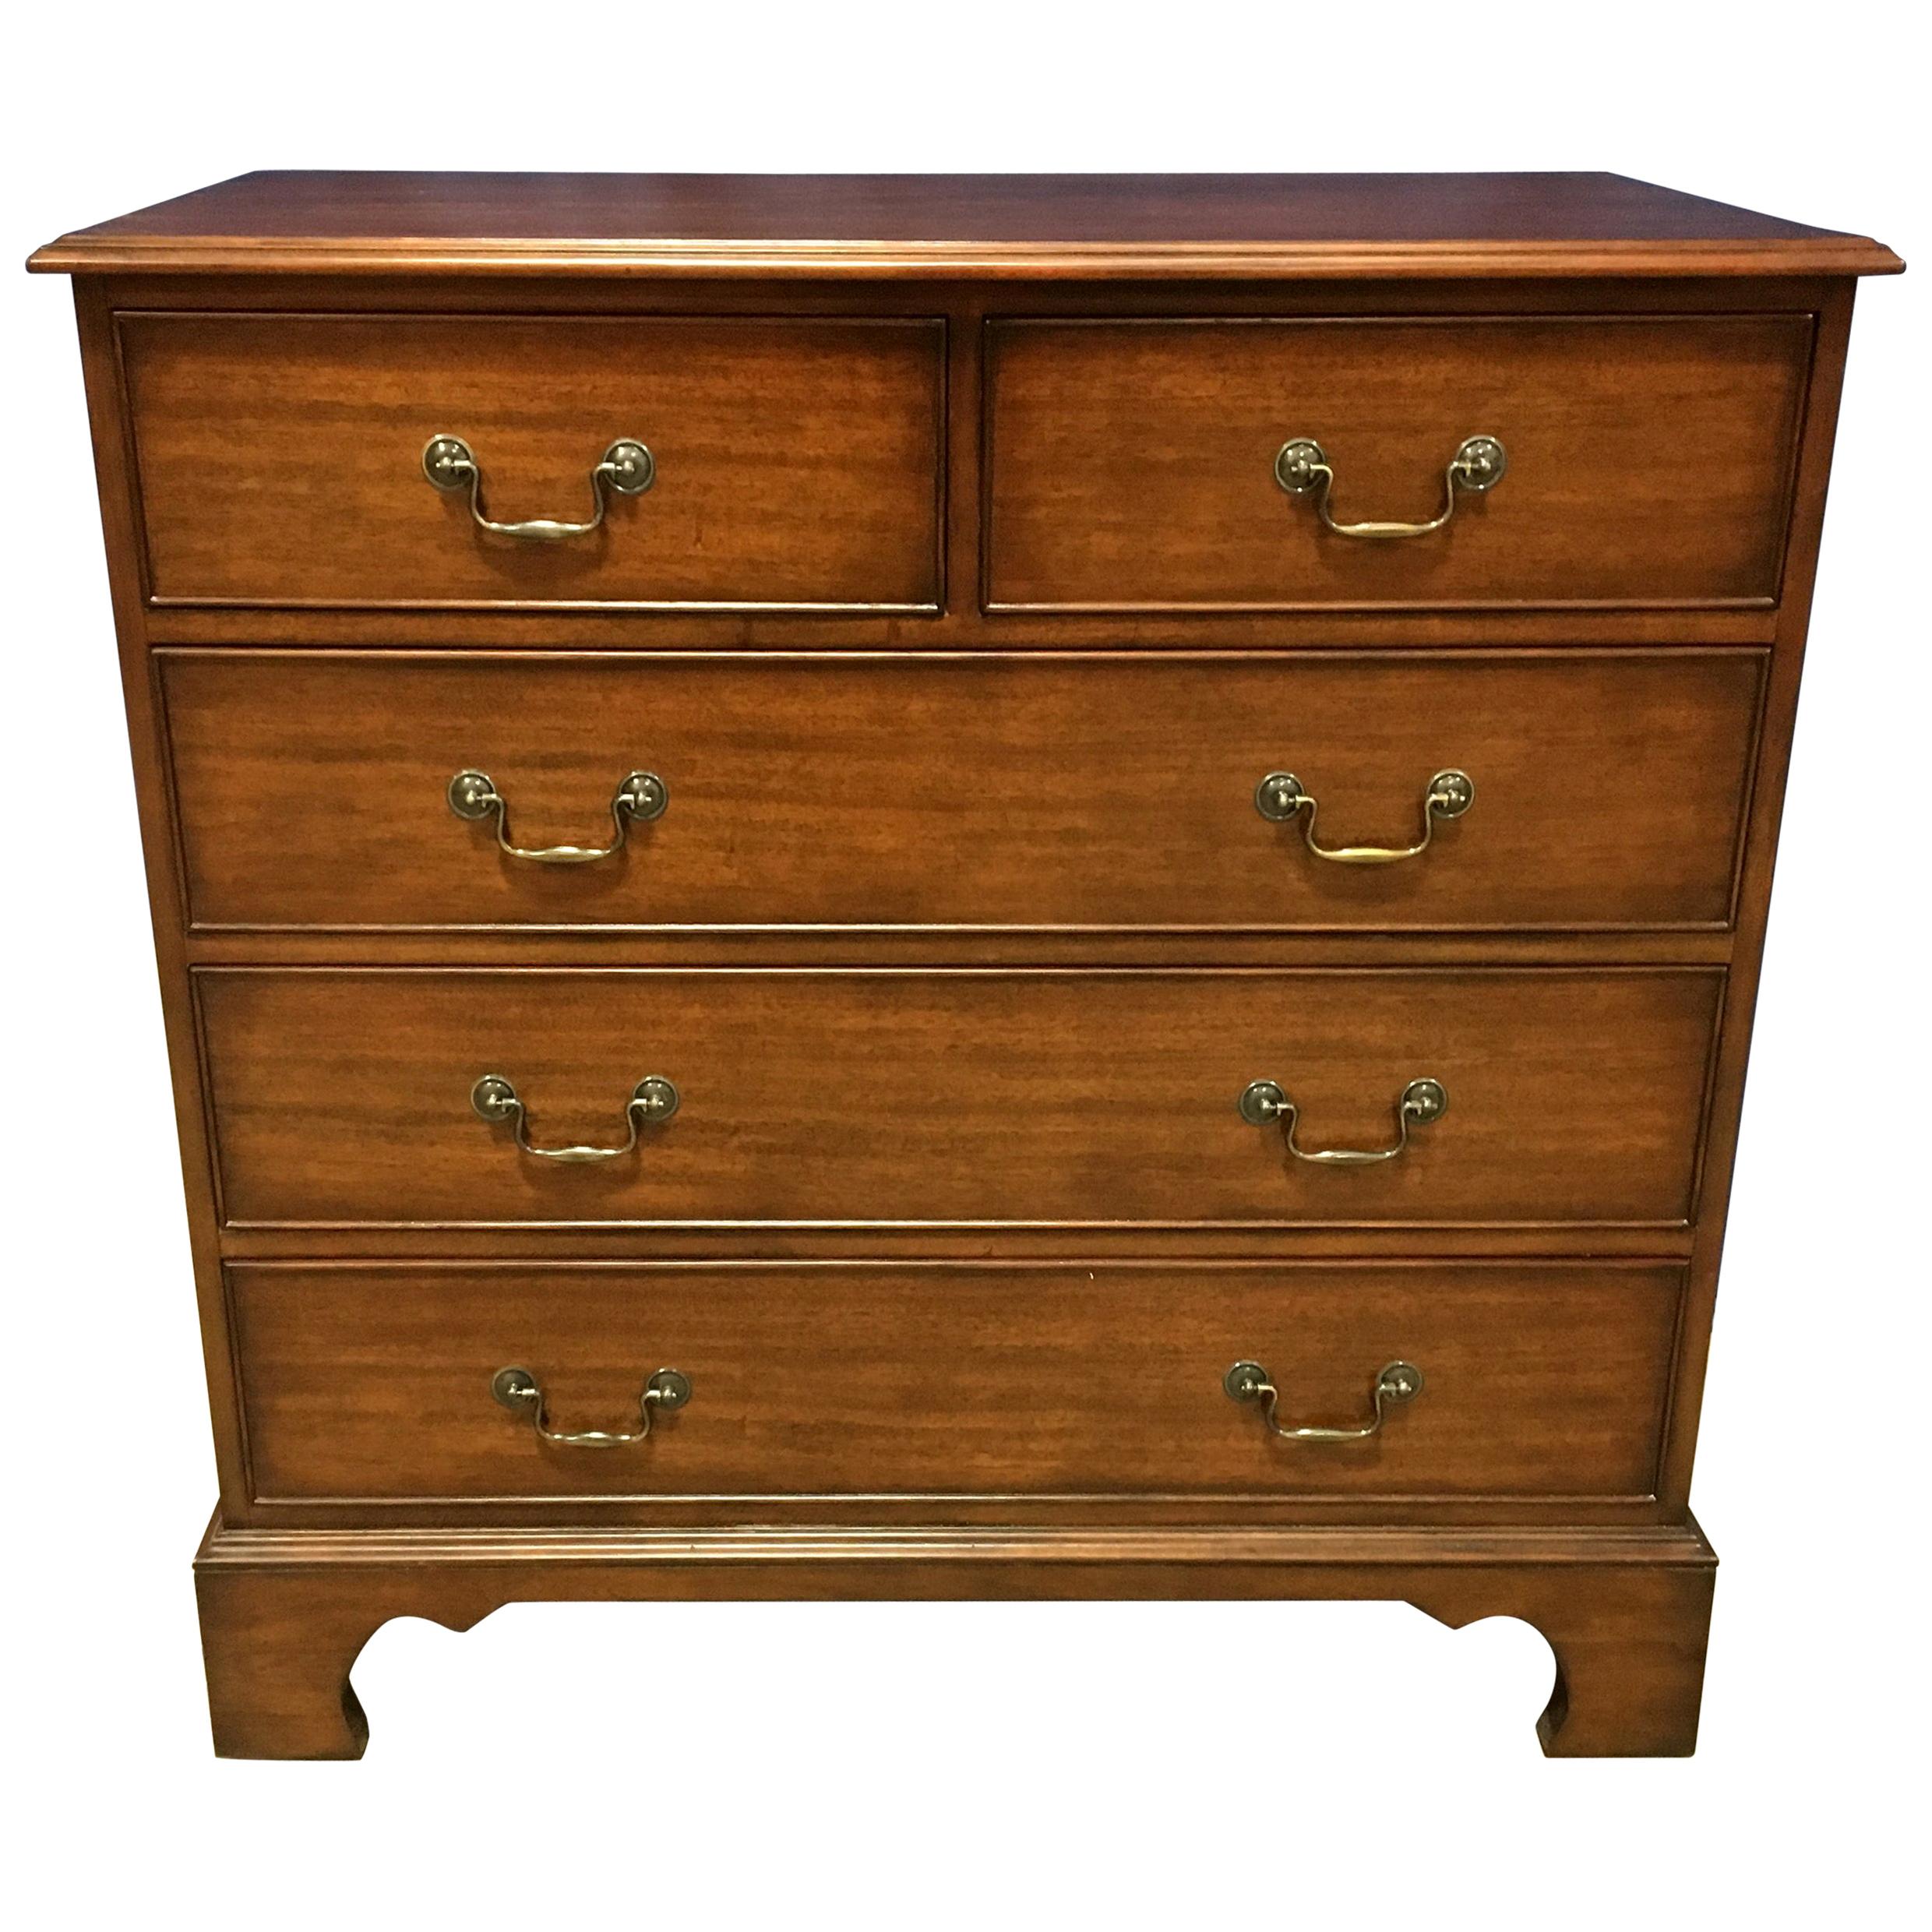 Mahogany Bachelor’s Chest by Leighton Hall